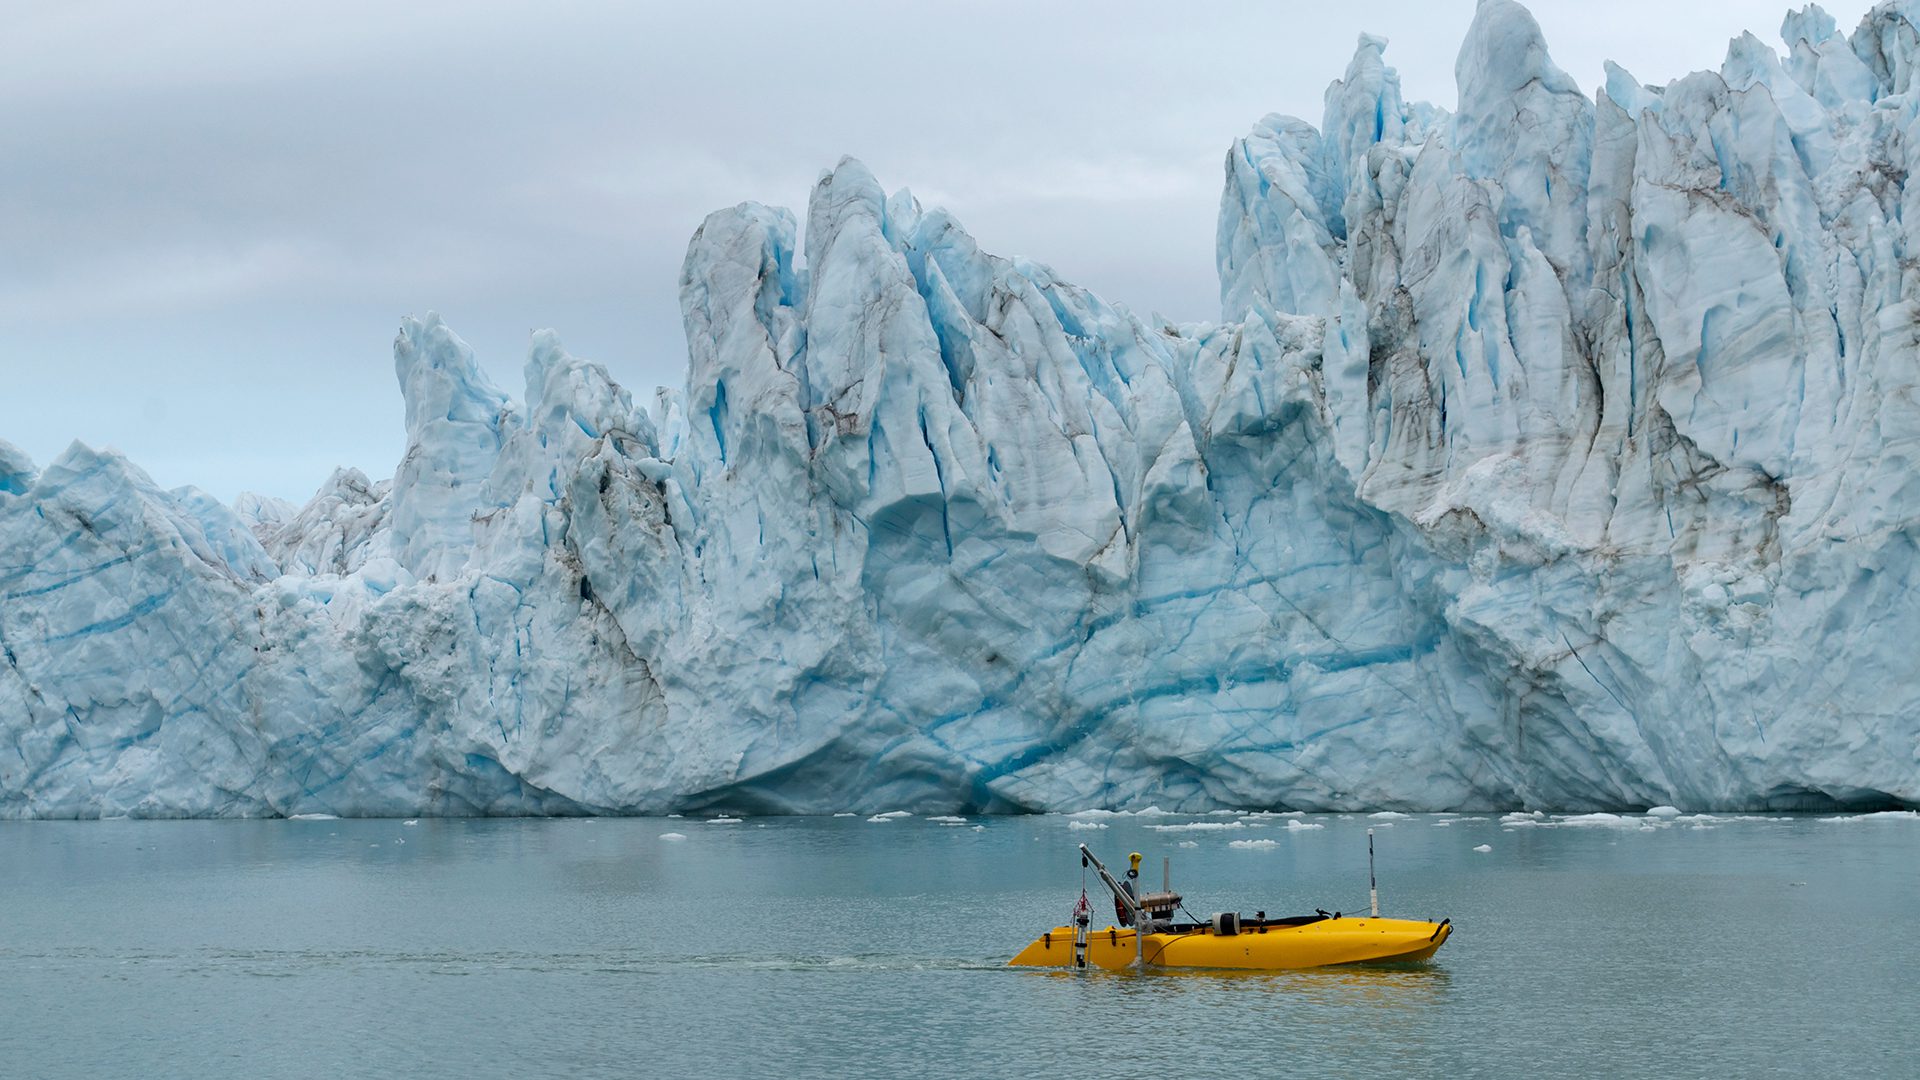 A yellow "JetYak" cruises close to West Greenlands Sarqardliup Glacier while keeping researchers out of harms way of its calving icebergs. WHOI engineer Hanumant Singh developed this autonomous surface vehicle (ASV) and, together with scientists Fiamma Straneo and Sarah Das, deployed the vehicle for field studies with support from the Arctic Research Initiative. They operated the JetYak by remote control aboard two small boats operated by local fishermen to map the glacier face using multibeam sonar, and gathered velocity, temperature and salinity data from the waters surrounding the glacier. (Photo courtesy of Fiamma Straneo,
© Woods Hole Oceanographic Institution)
